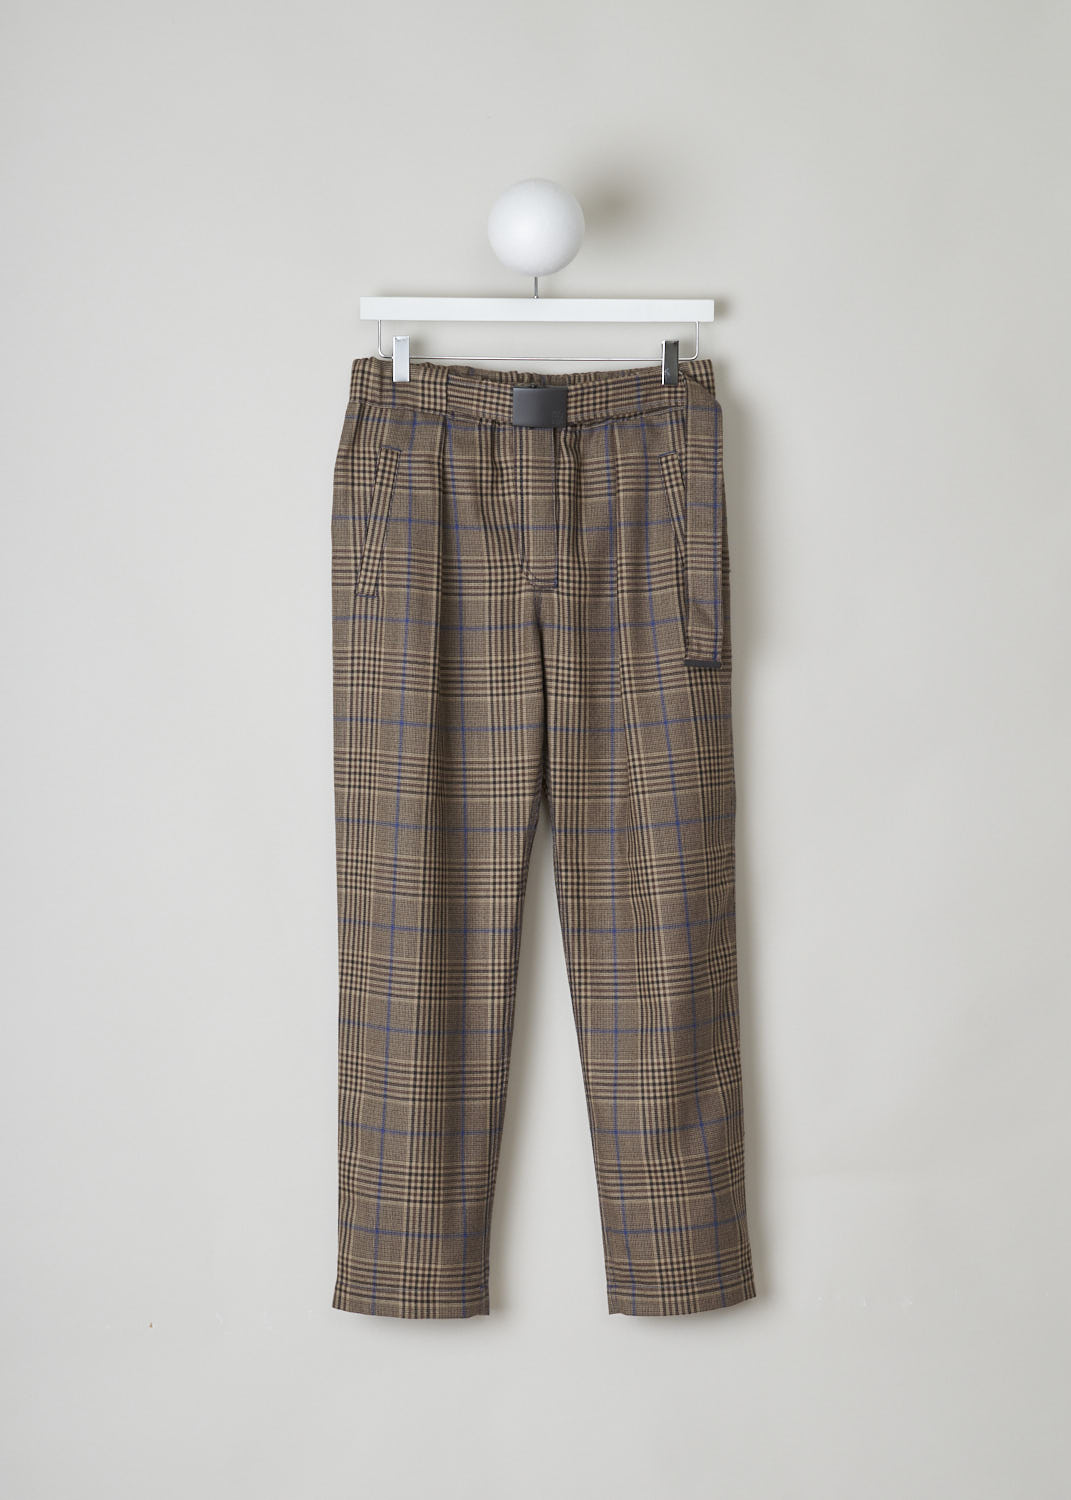 BRUNELLO CUCINELLI, WOOL CHECKED PANTS WITH BLUE THREADING, MA111P6823_C2373, Brown, Front, These brown checkered wool trousers feature an elasticated waistband with a built-in belt in the same checkered fabric. The belt has a black rectangular clasp. These trousers have slanted pockets and a pleated front and slightly tapered pant legs. In the back, two welt pockets can be found. 
